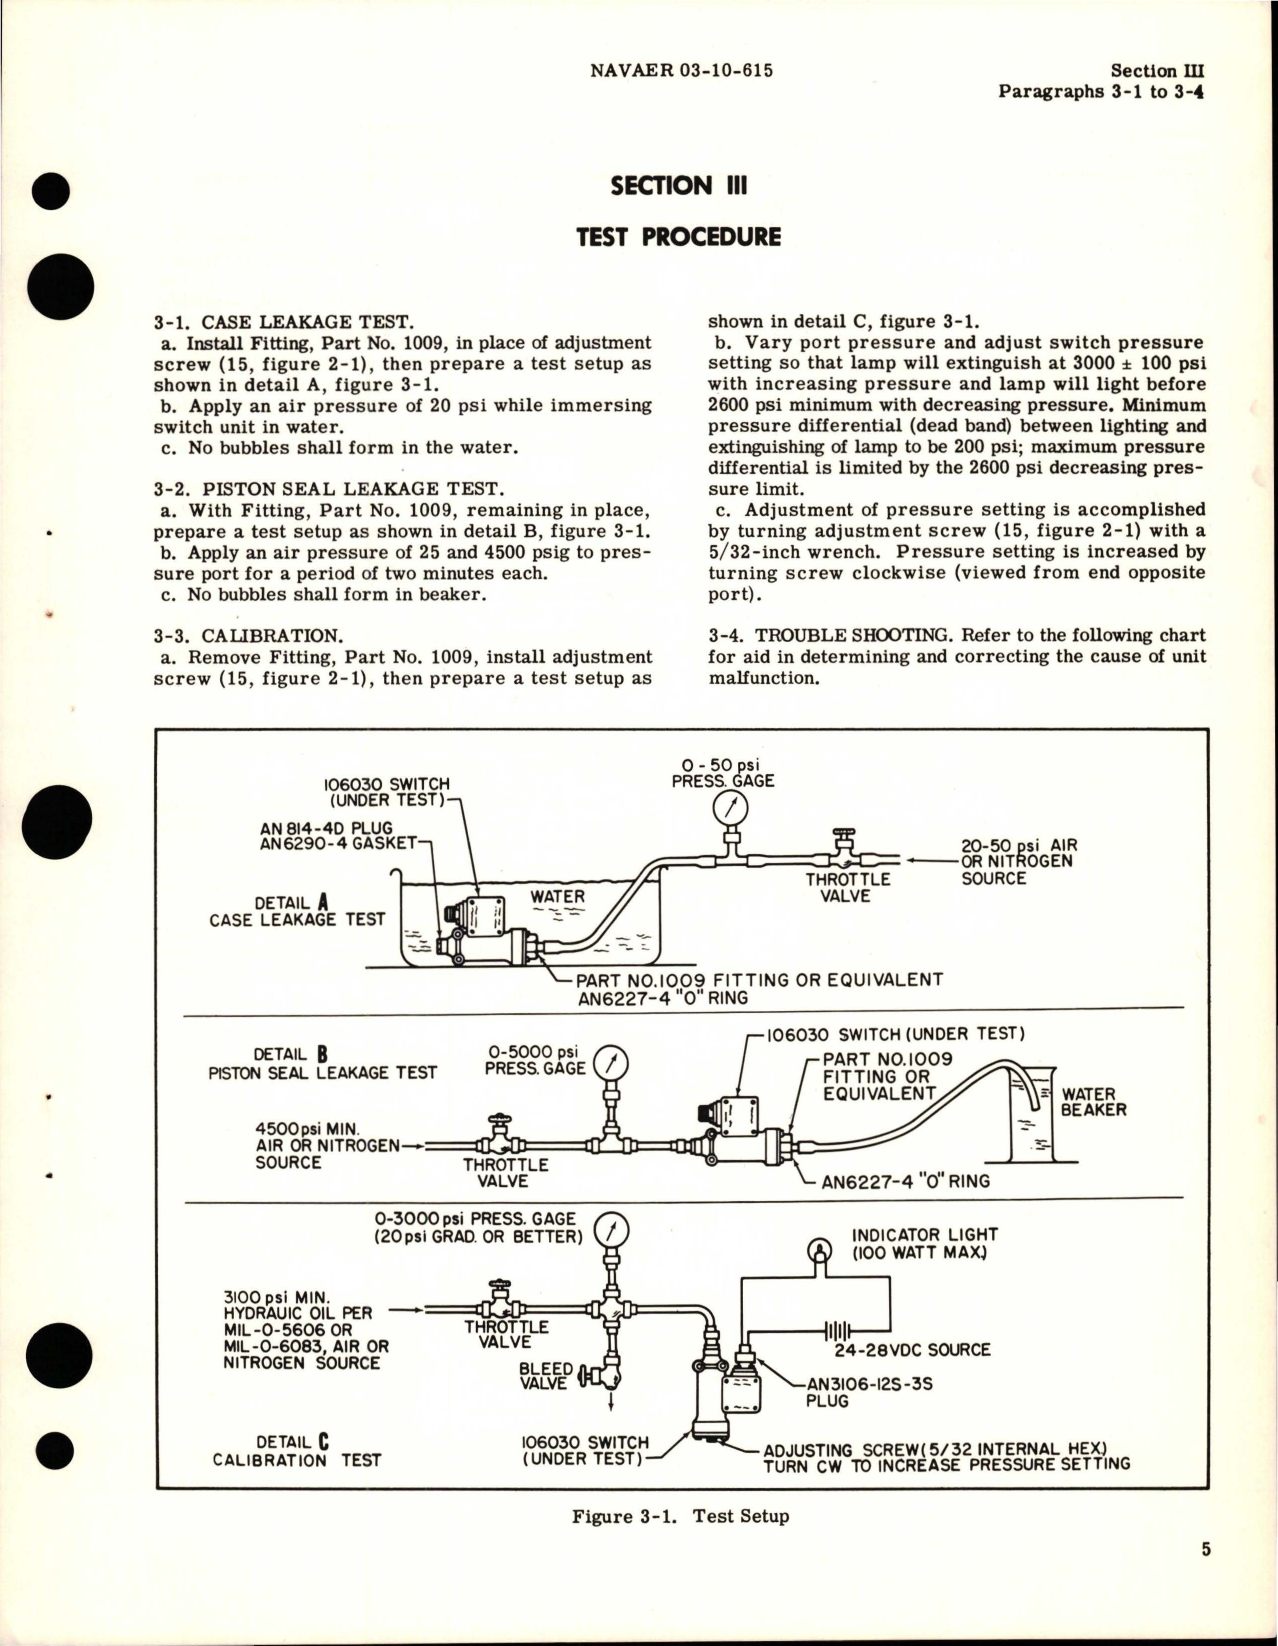 Sample page 7 from AirCorps Library document: Overhaul Instructions for Hydraulic and Pneumatic Pressure Switches 